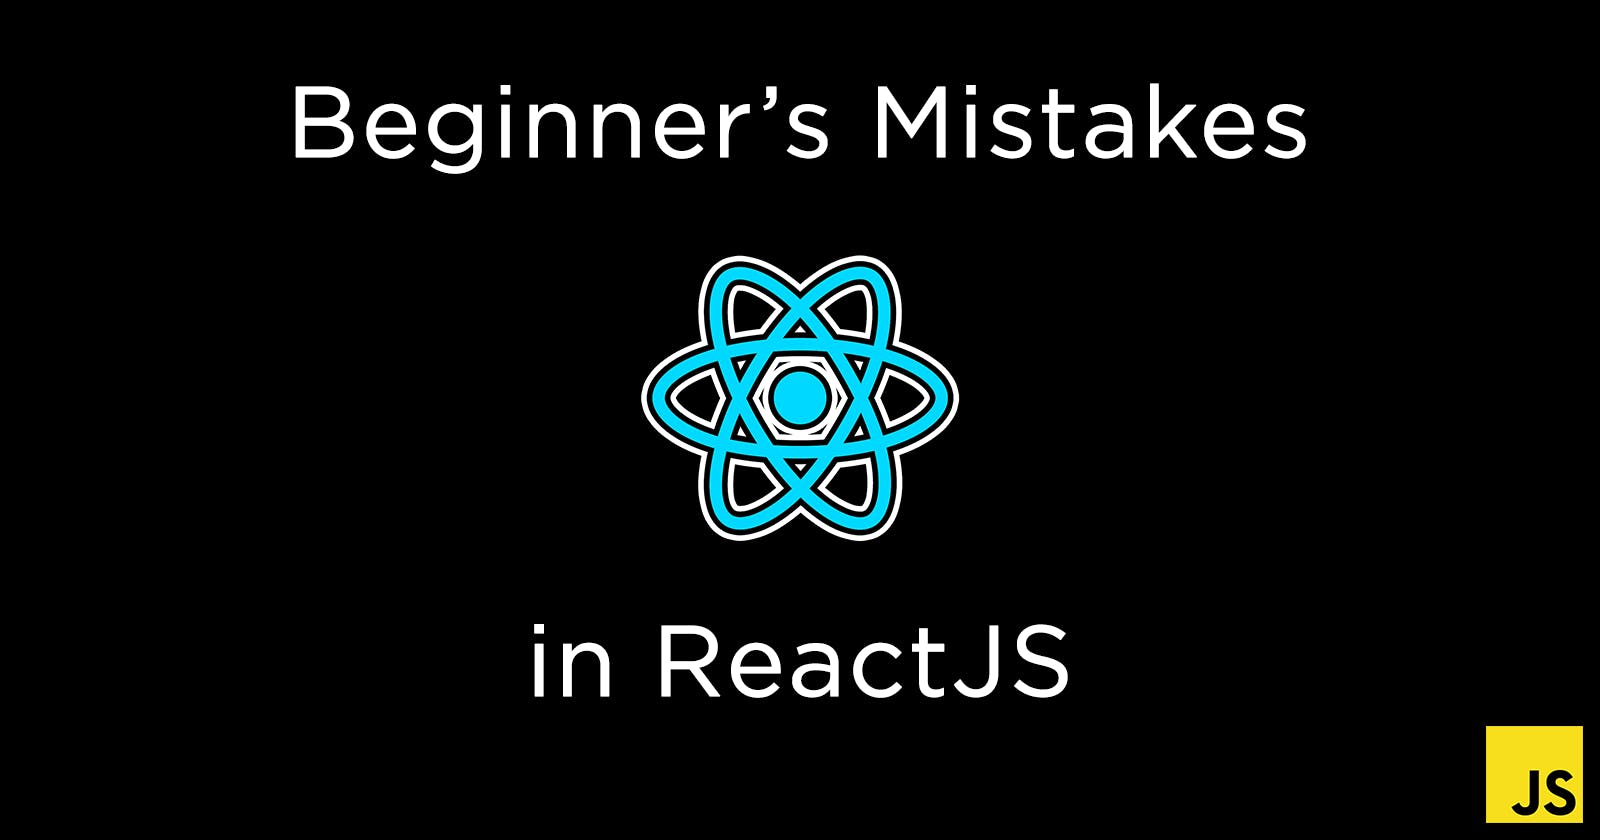 Five most common beginners' mistakes in ReactJS